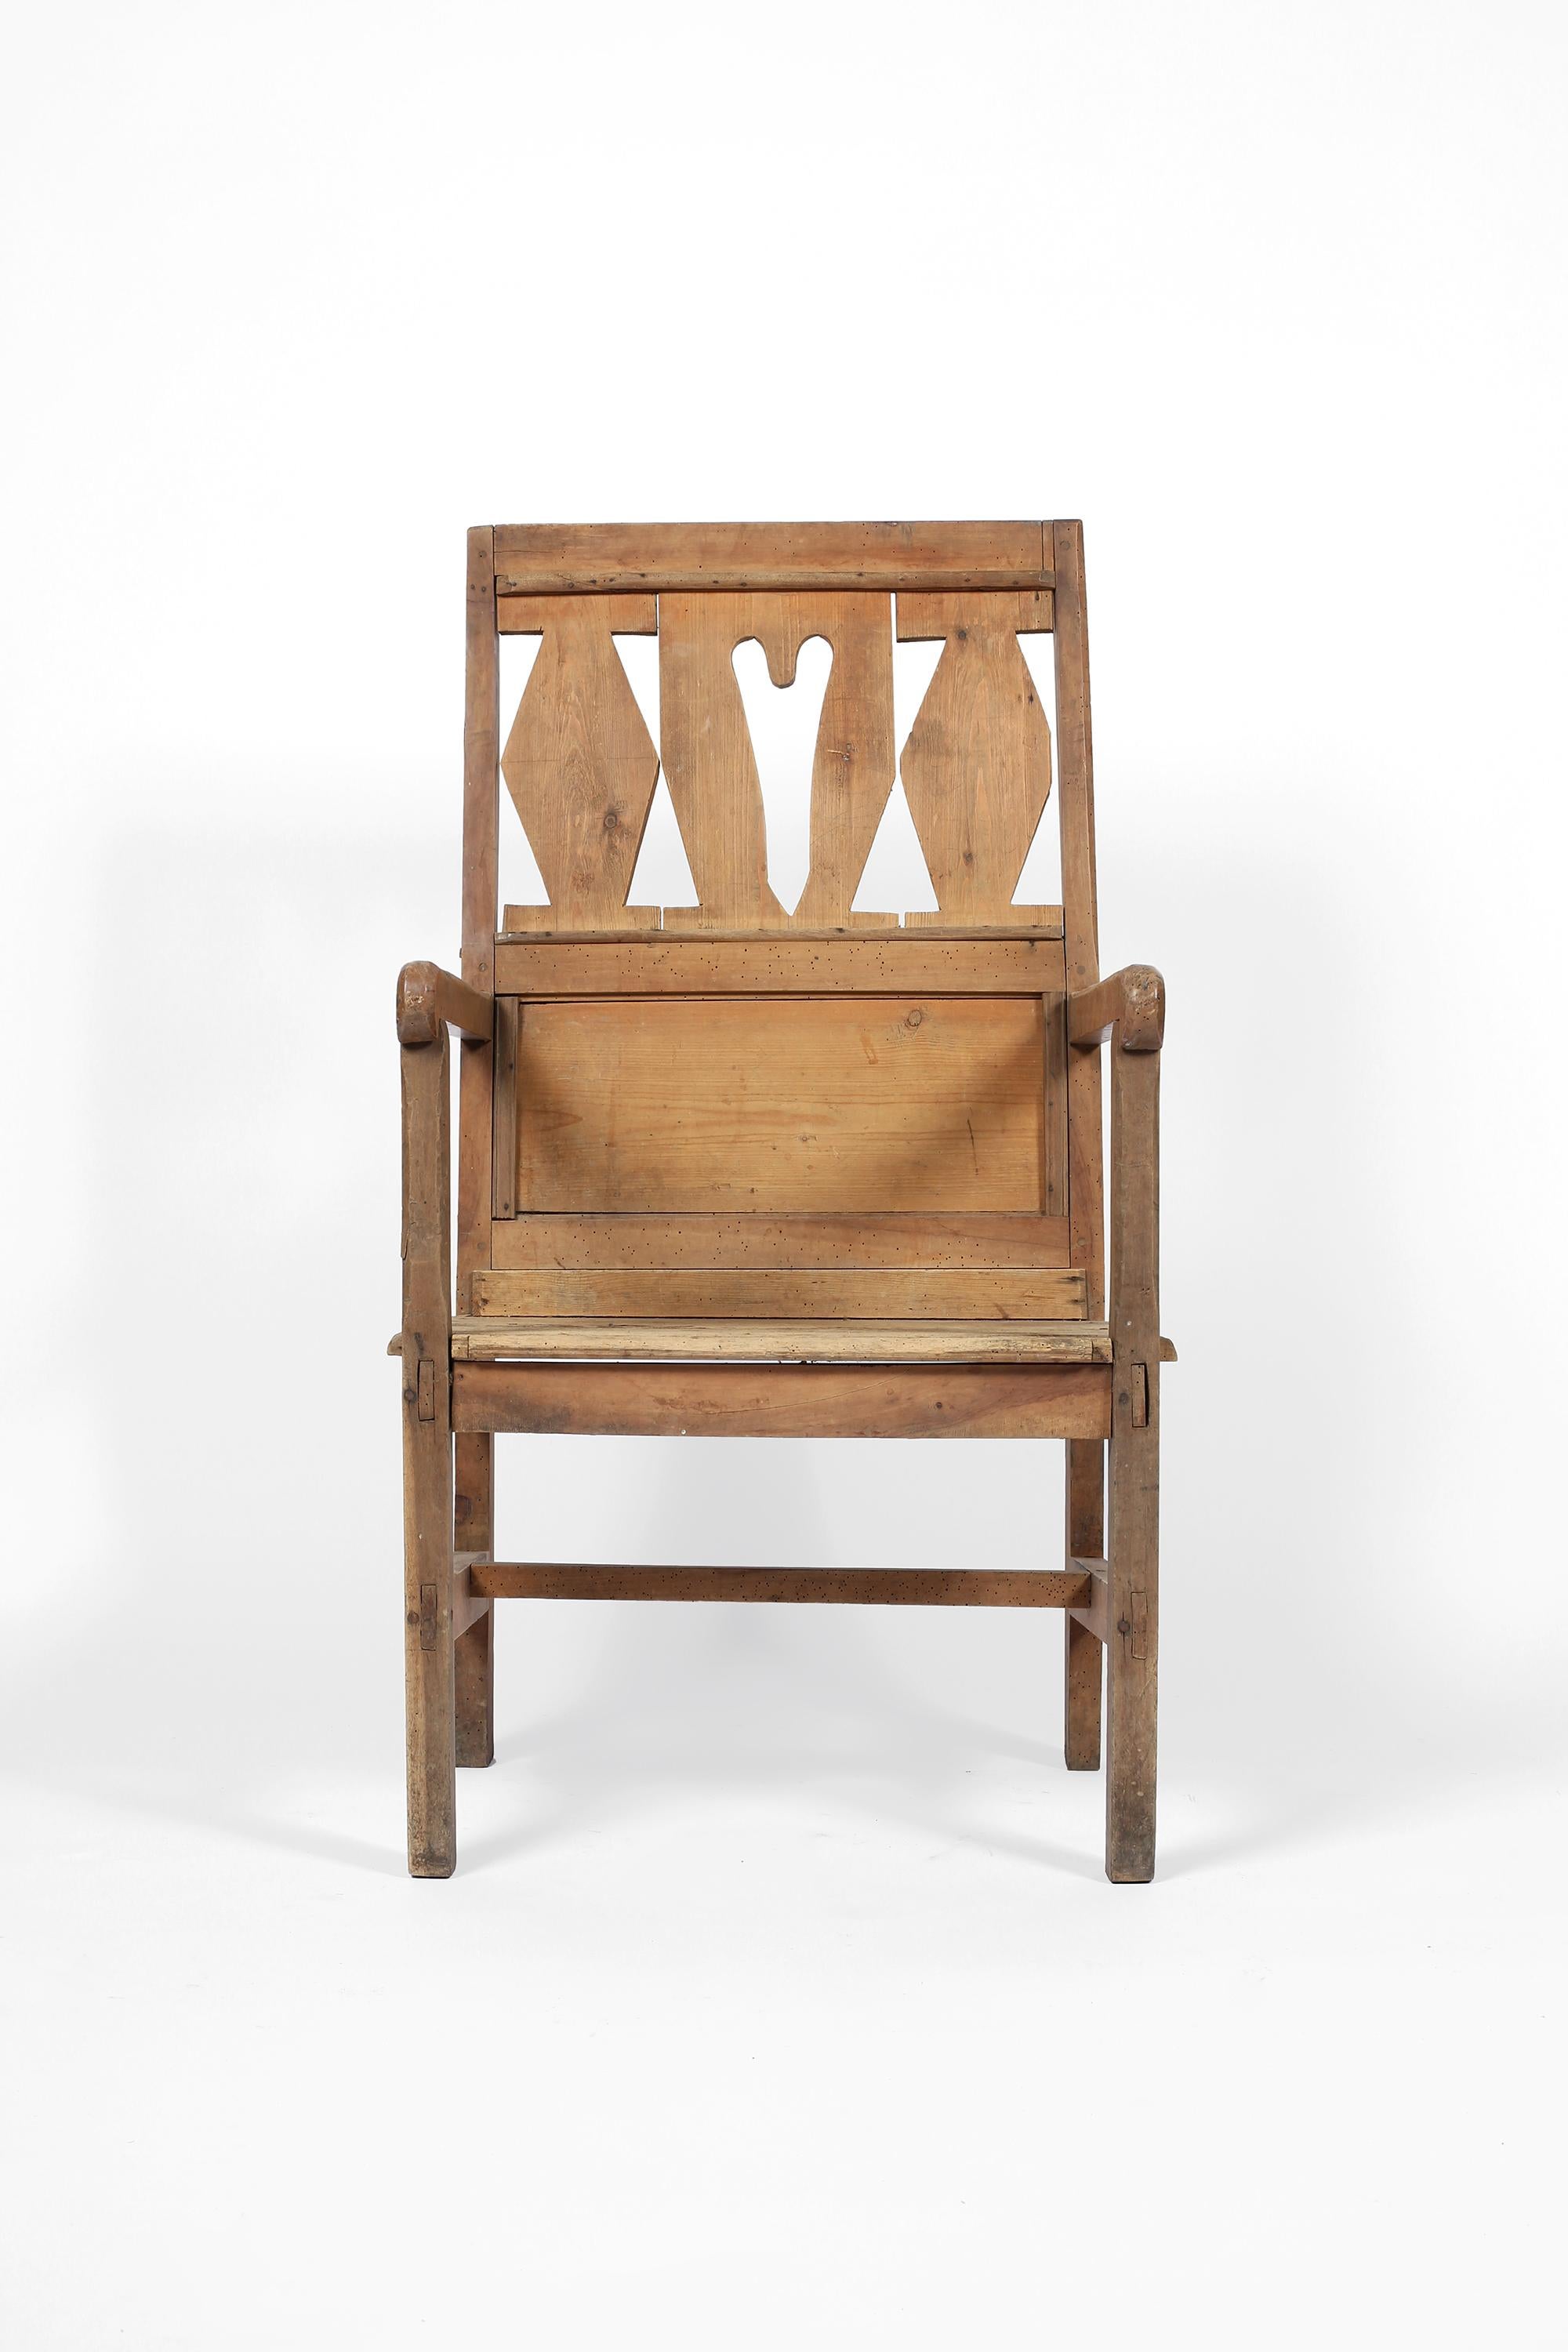 A charming late 19th century pine occasional armchair from the Alps region. Likely estate made with naive fretwork detailing to the tall, throne-like back rest. French, circa 1880.